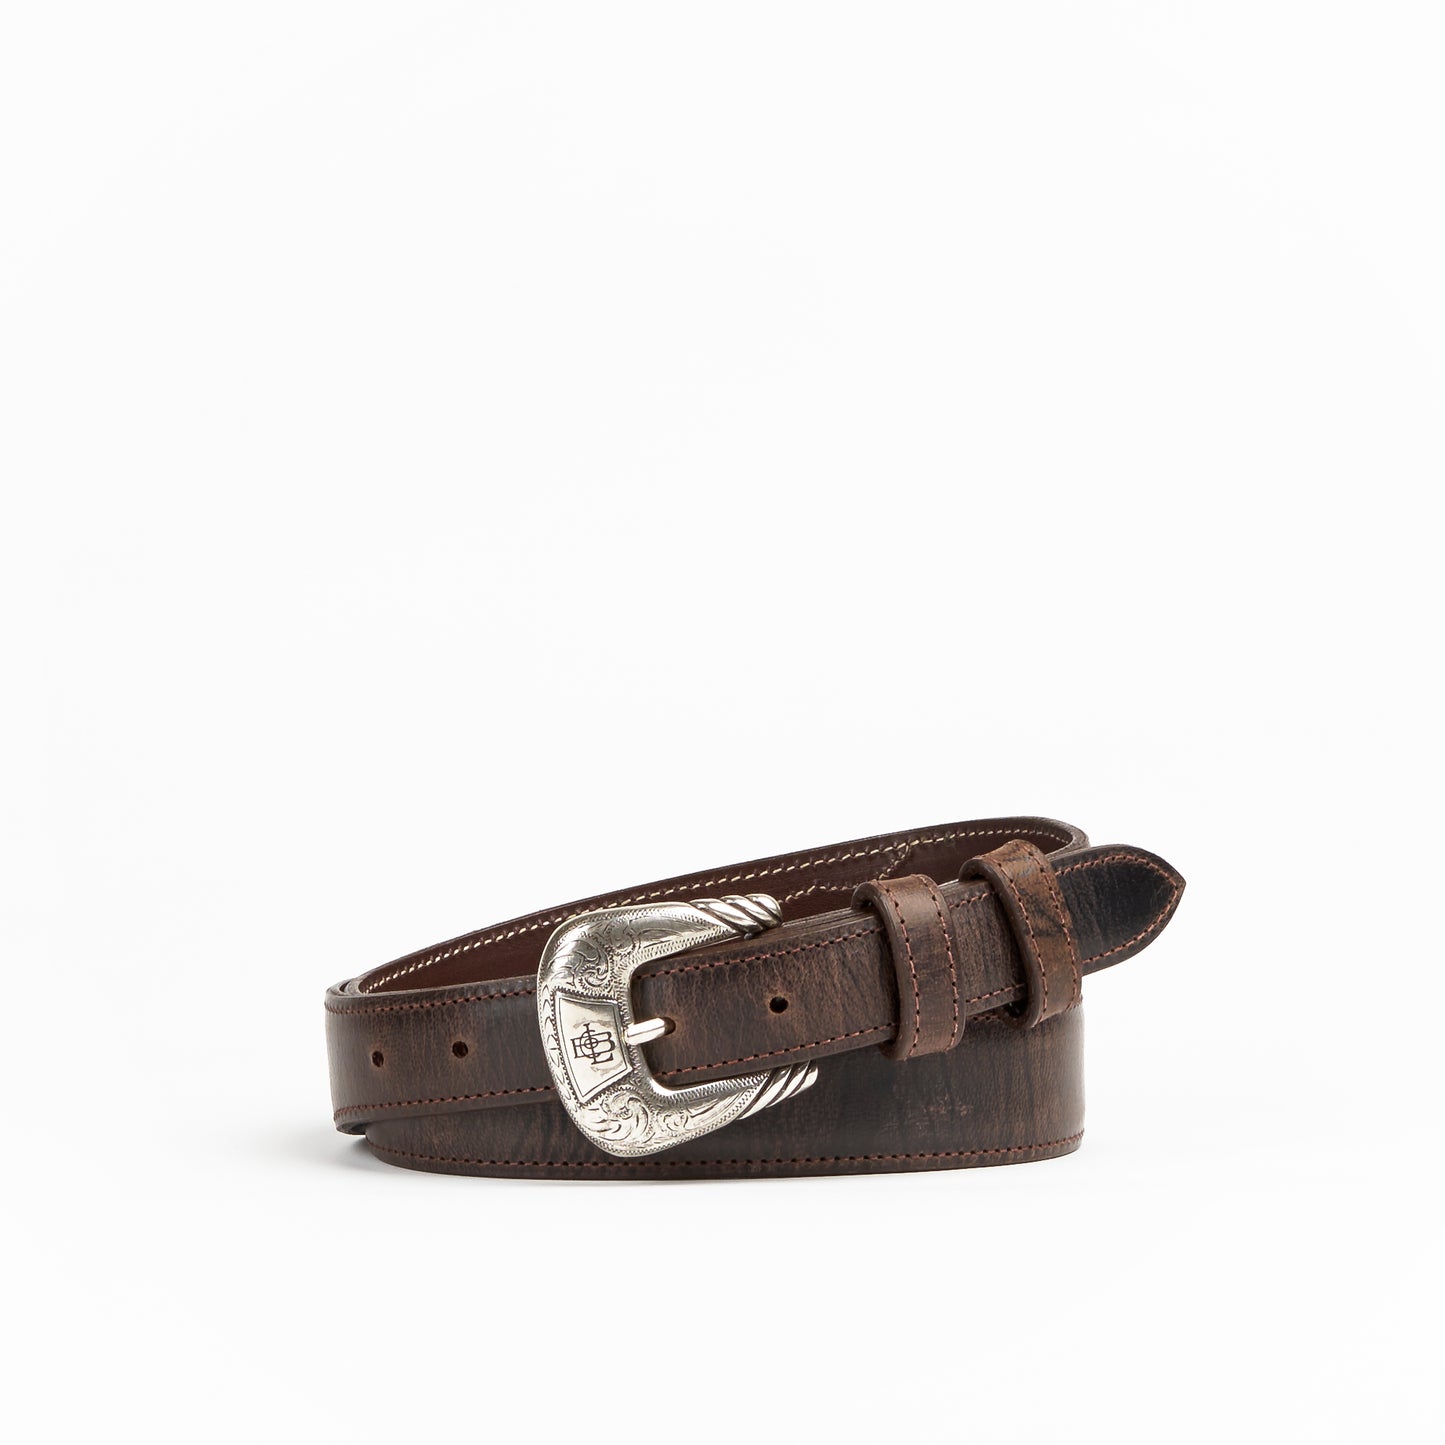 Allens Boots Exclusive Taper Chocolate Mad Dog Goat Belt #2GG-MC